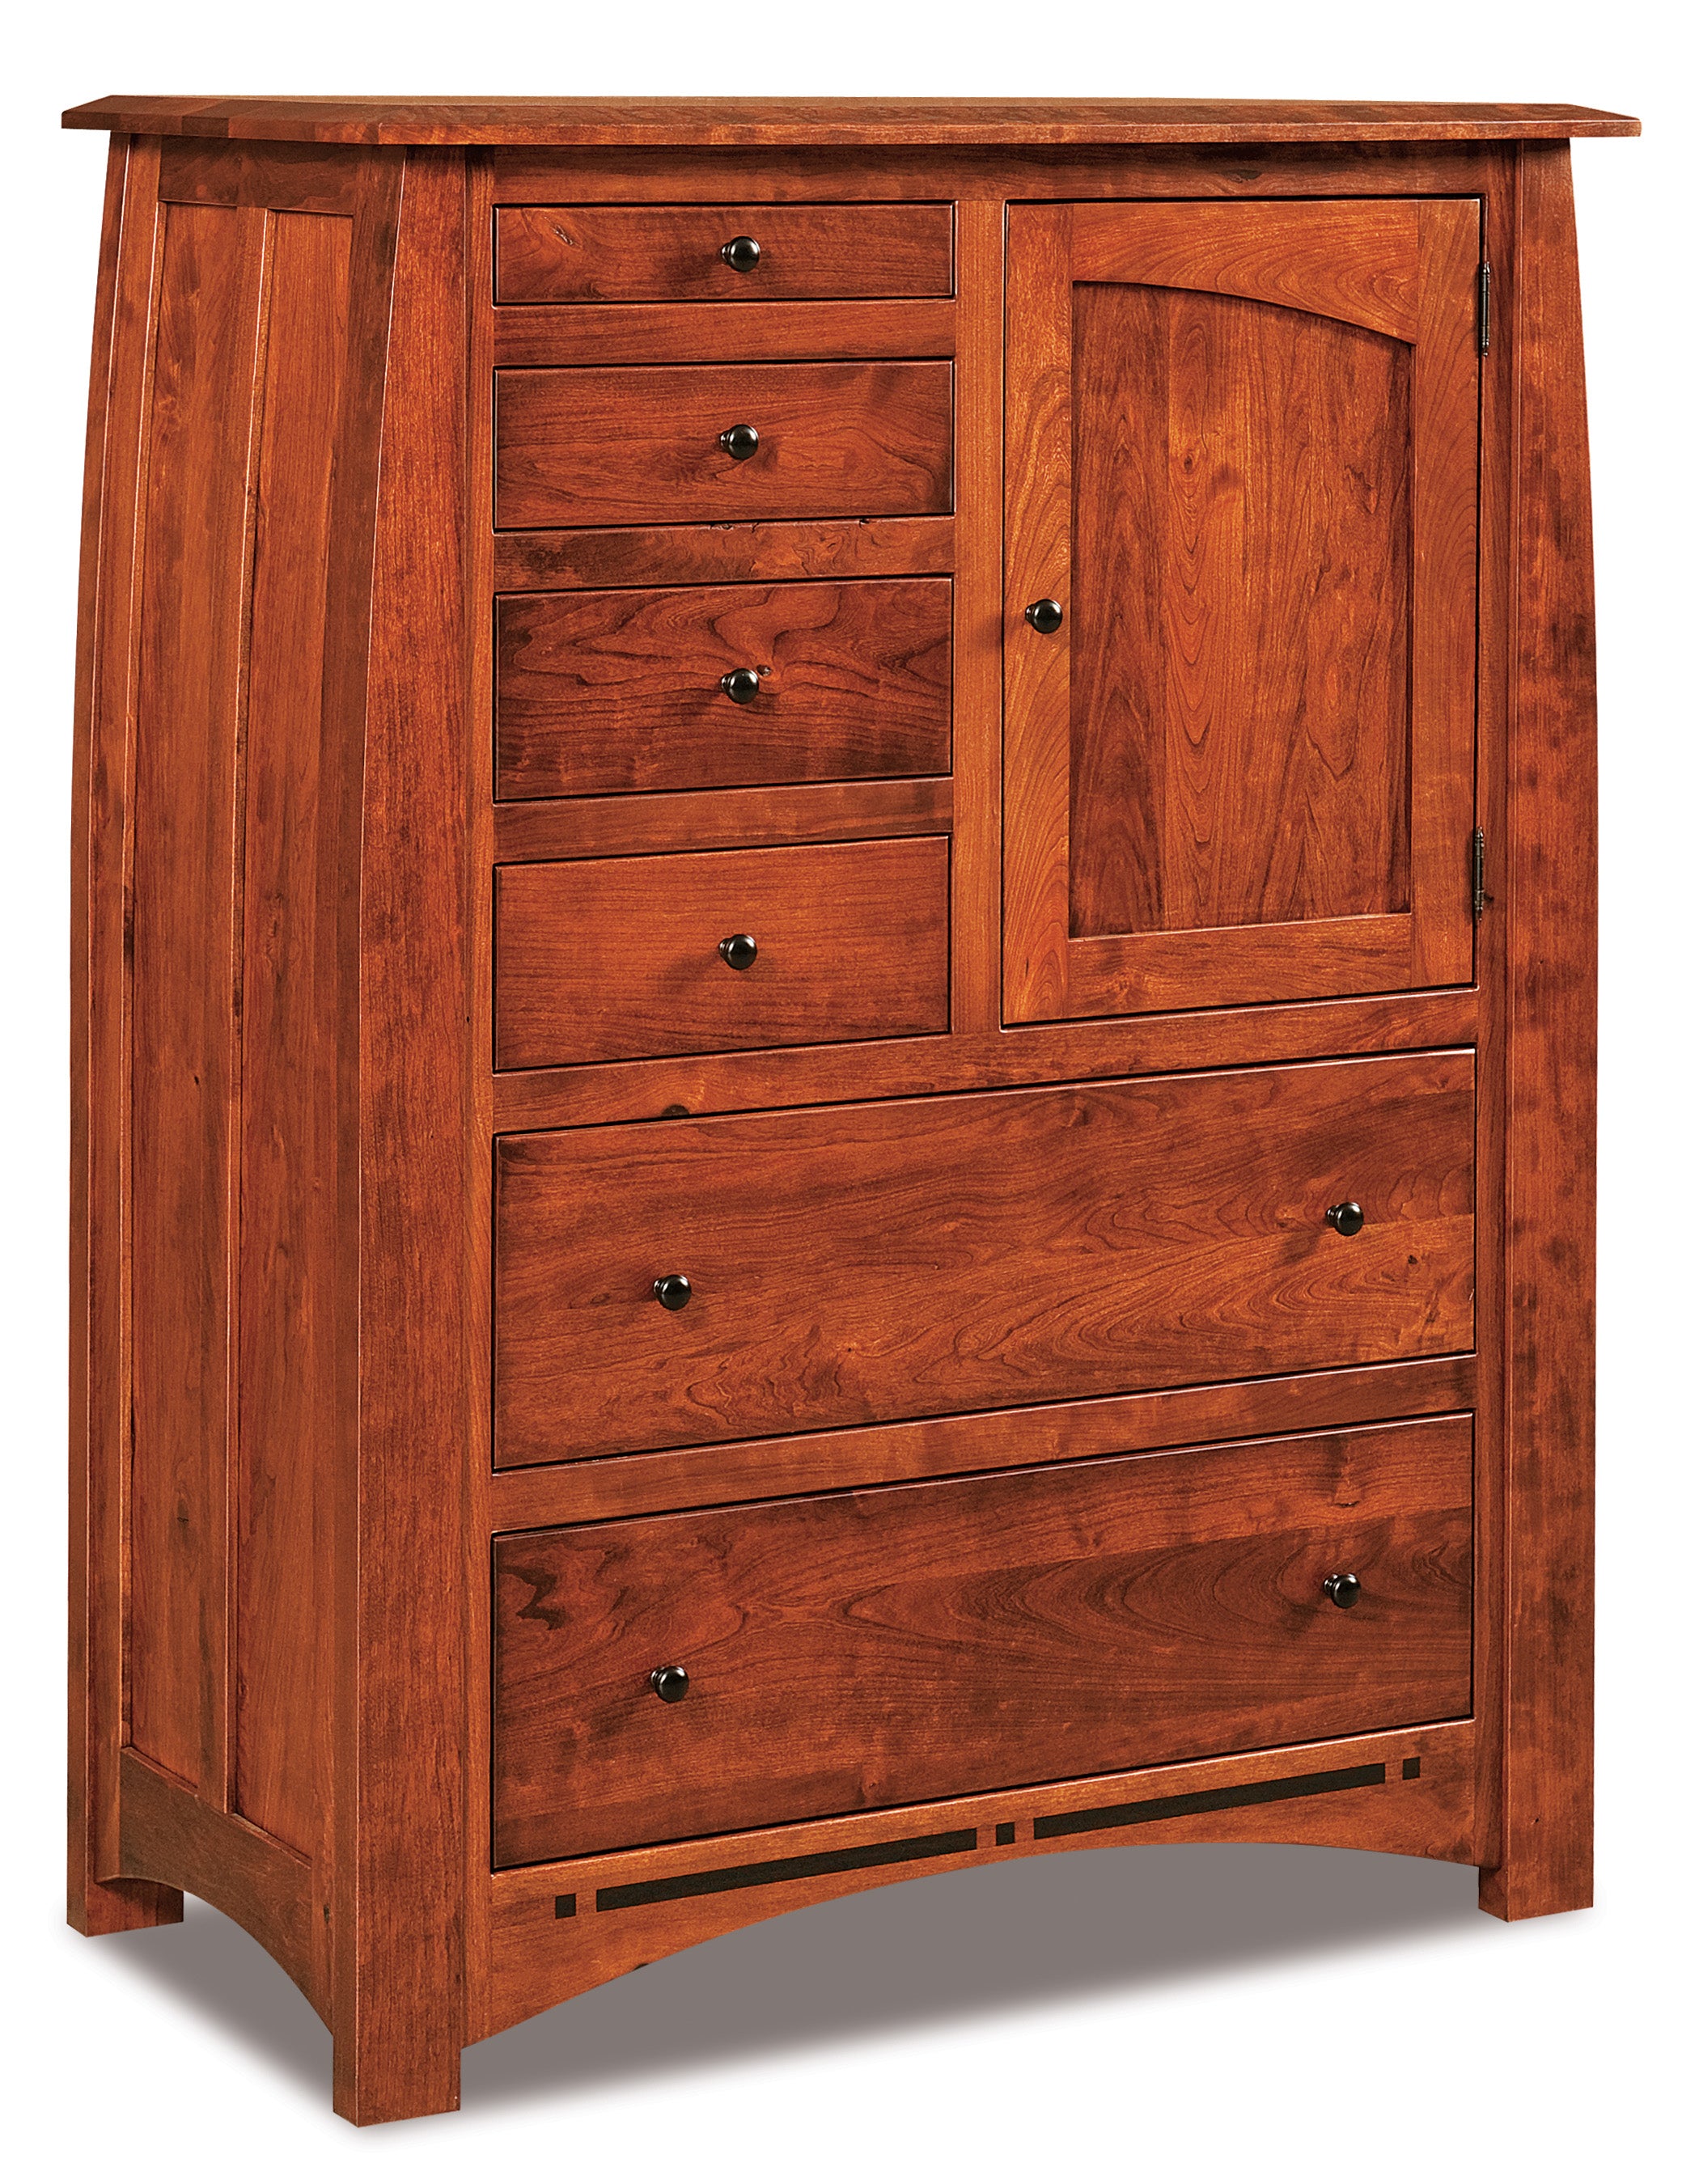 Amish Boulder Creek Chest of Drawers